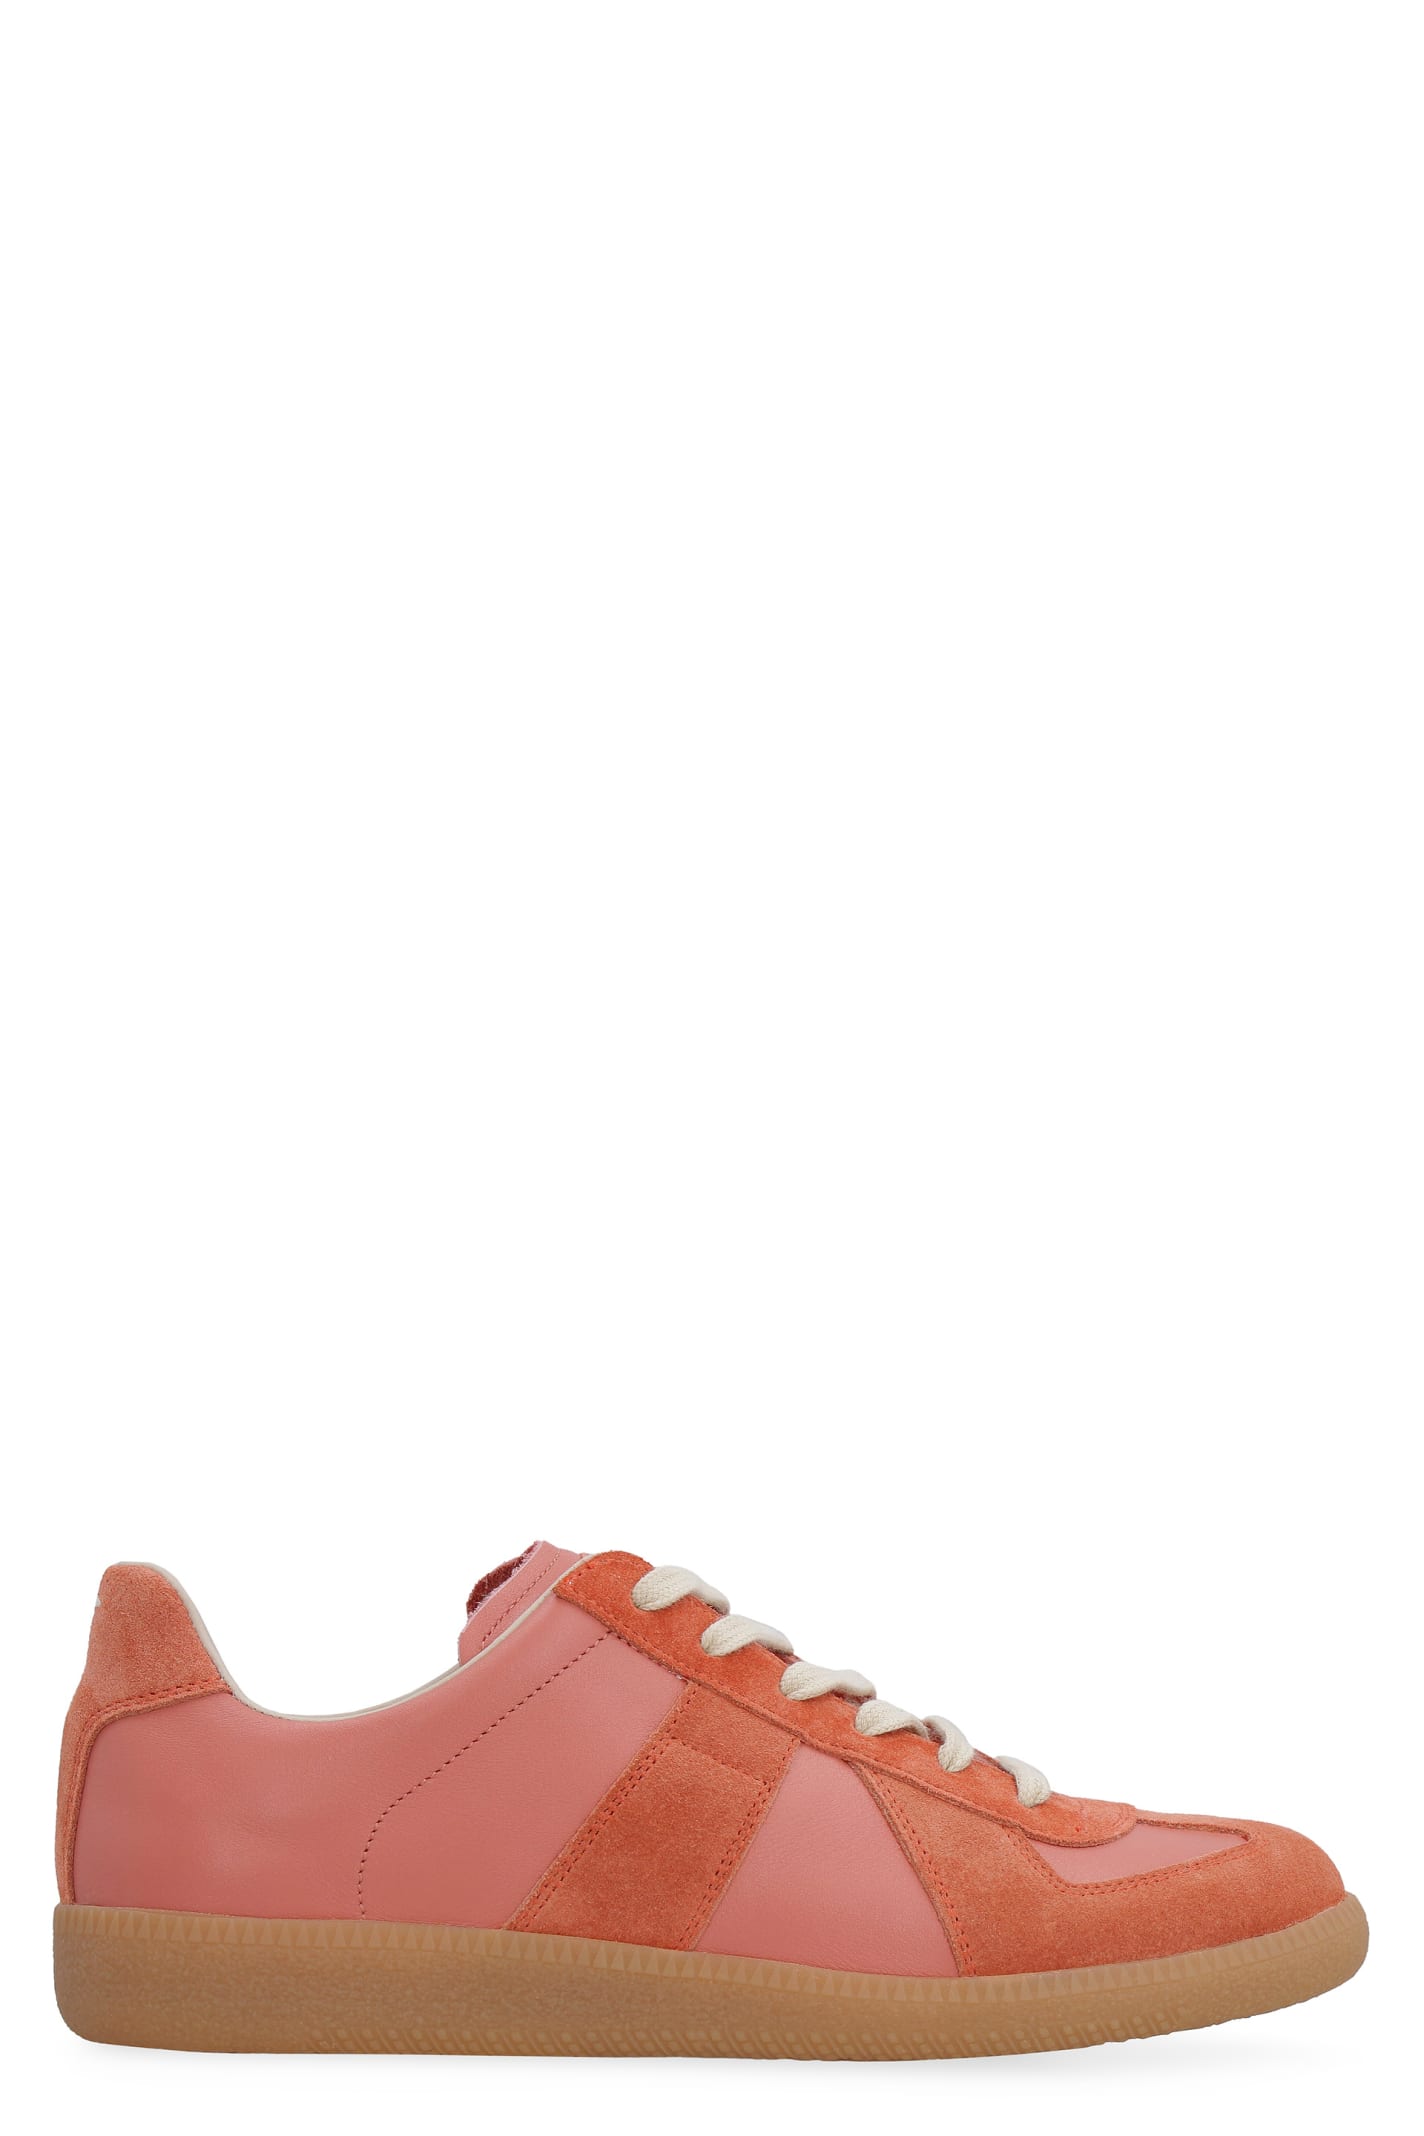 Maison Margiela Replica Leather Low-top Sneakers